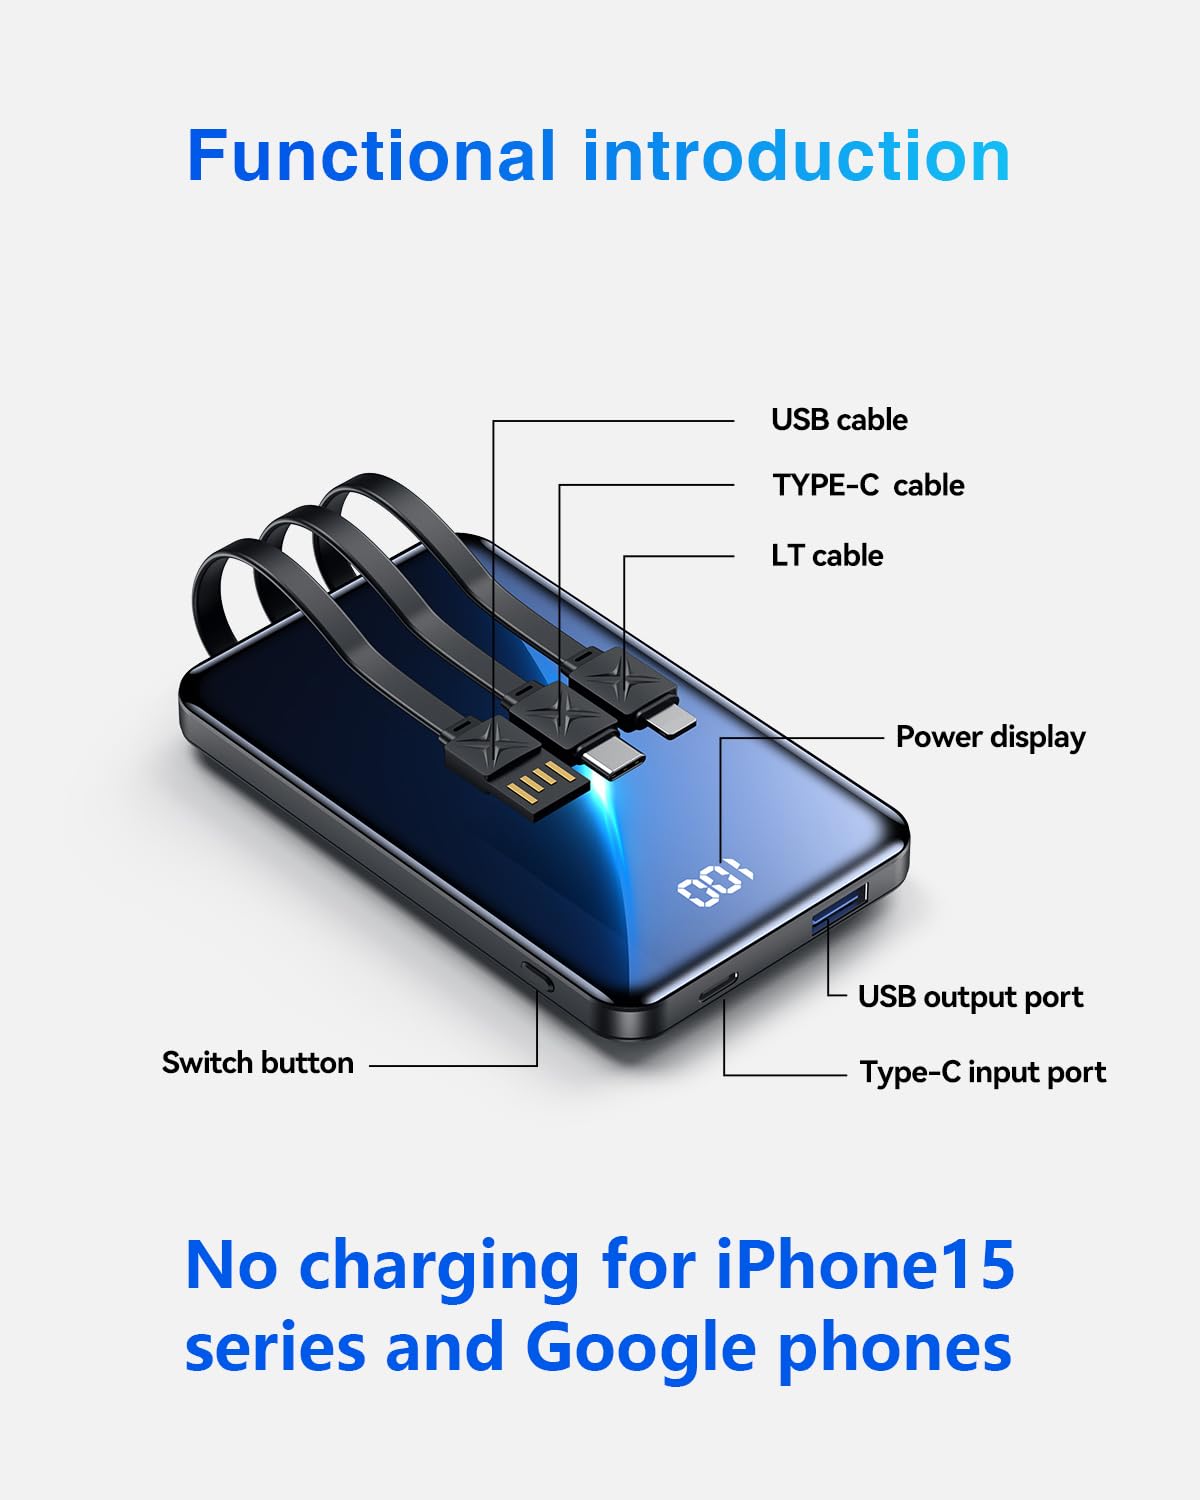 Portable Charger small Power Bank 12000mAh,Mini Fast Charging Power Bank,Battery Bank with Built-in Cables,2 Input and 4 output External Battery Pack Compatible with iPhone14/13/12/11/10/9/Android etc